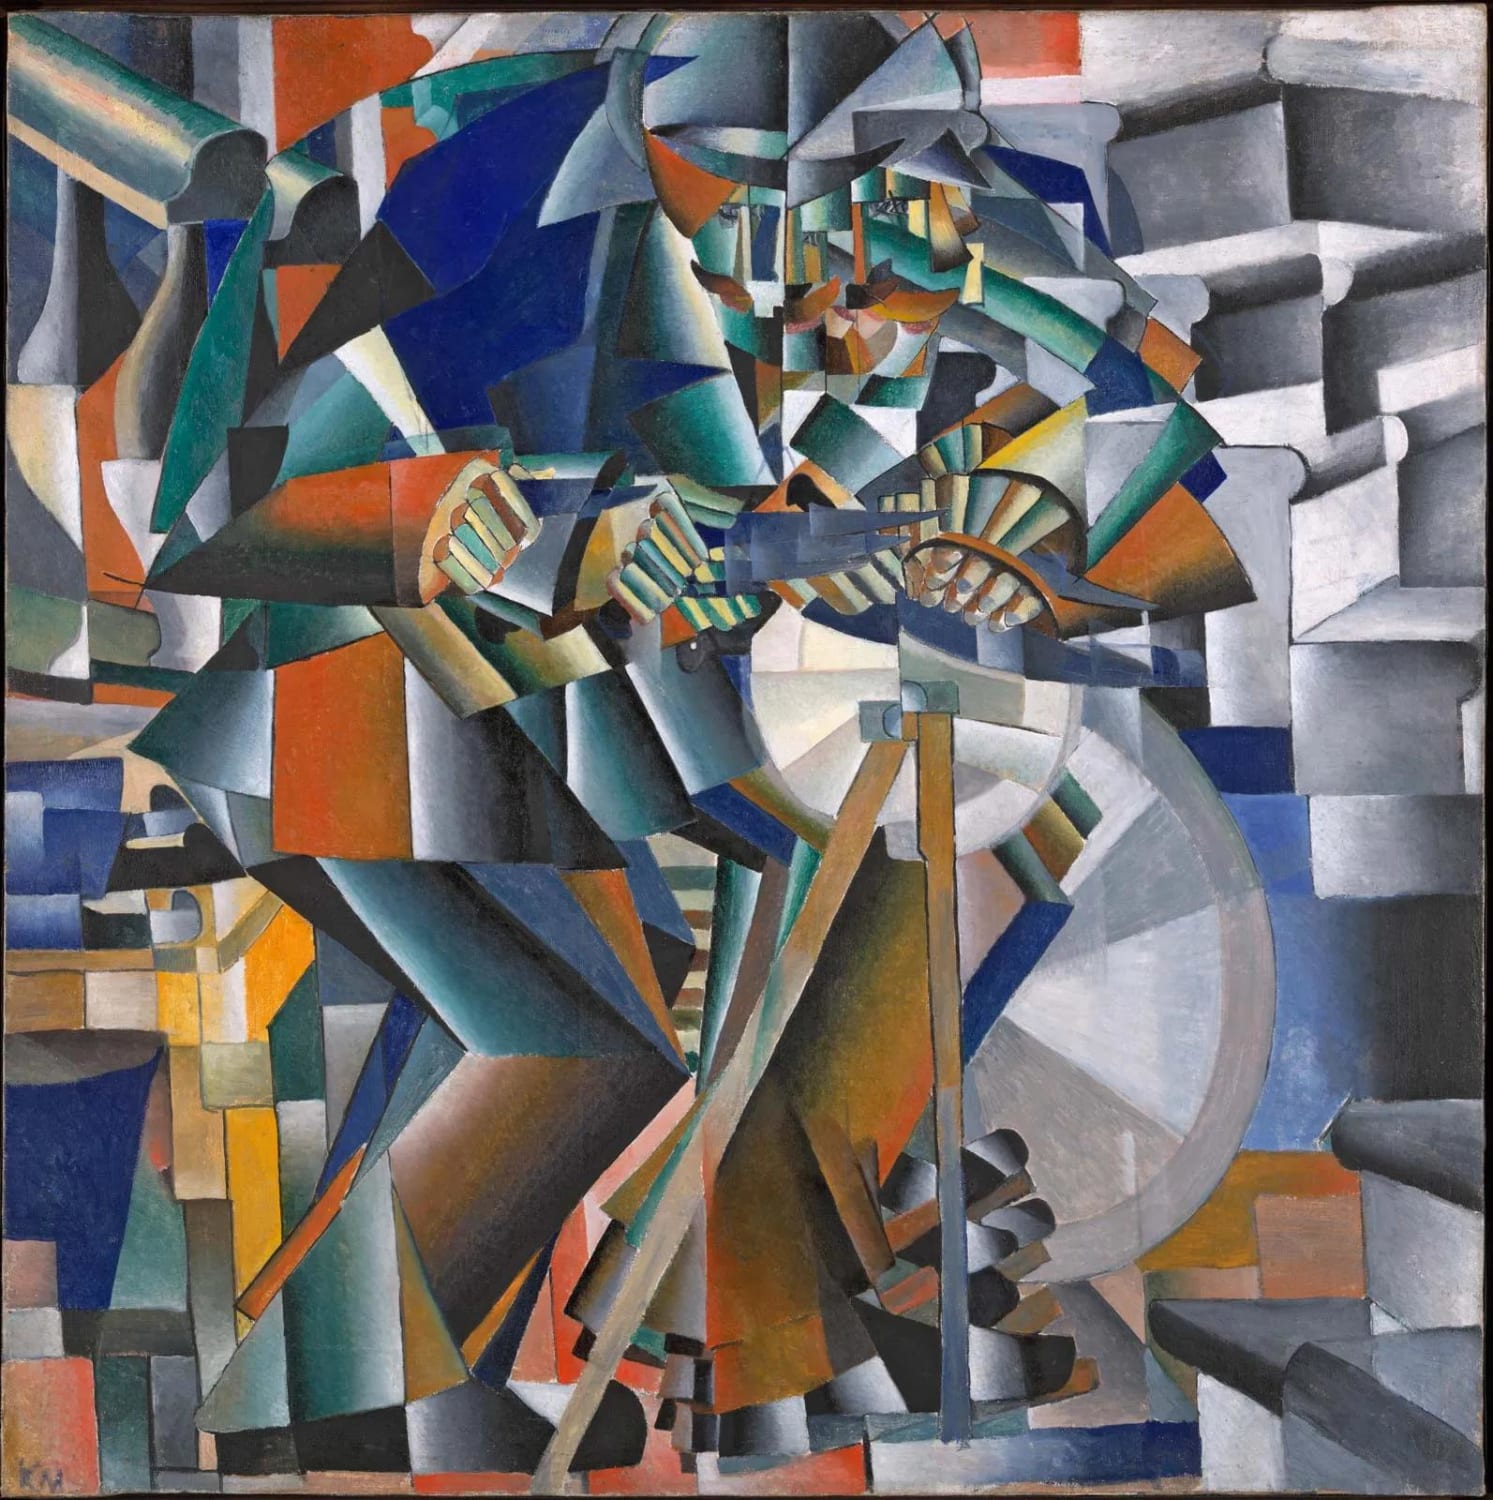 Kazimir Malevich, "The Knife Grinder or Principle of Glittering" (1912-13)